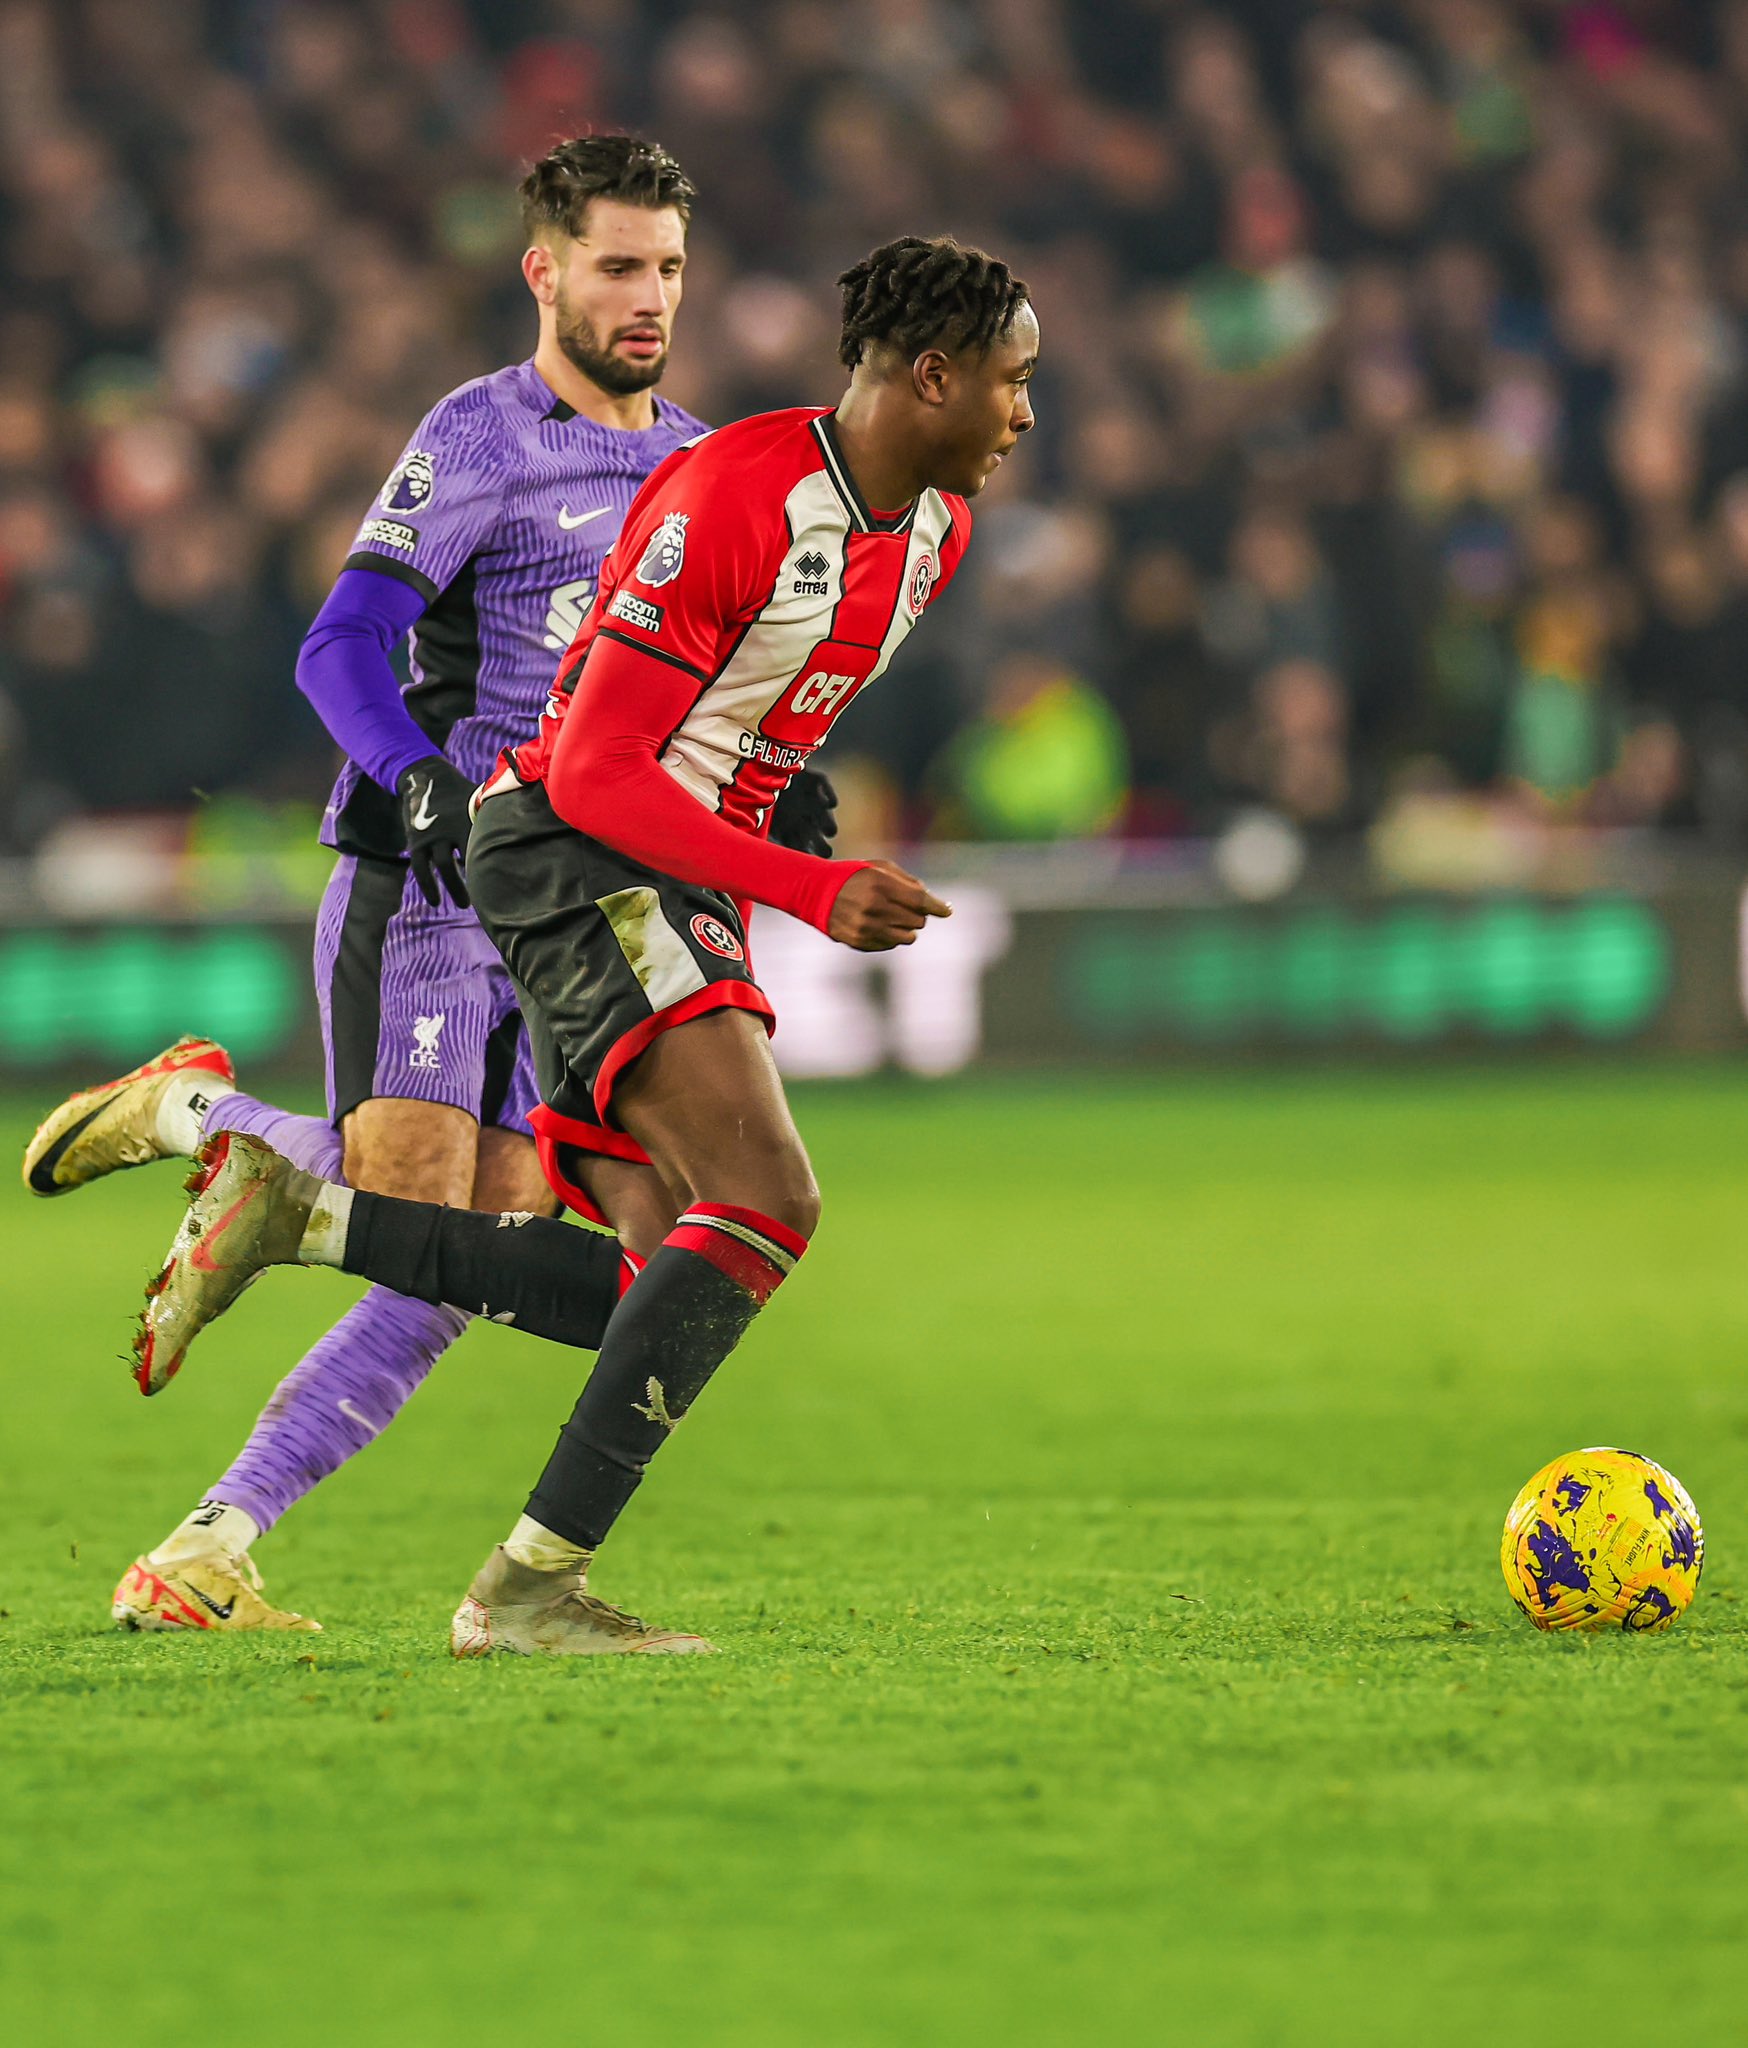 Sheffield United on X: Sheffield United condemn the racist, abusive and  threatening messages that have been sent to Wes Foderingham after  yesterday's game against Spurs. The club will now work with relevant